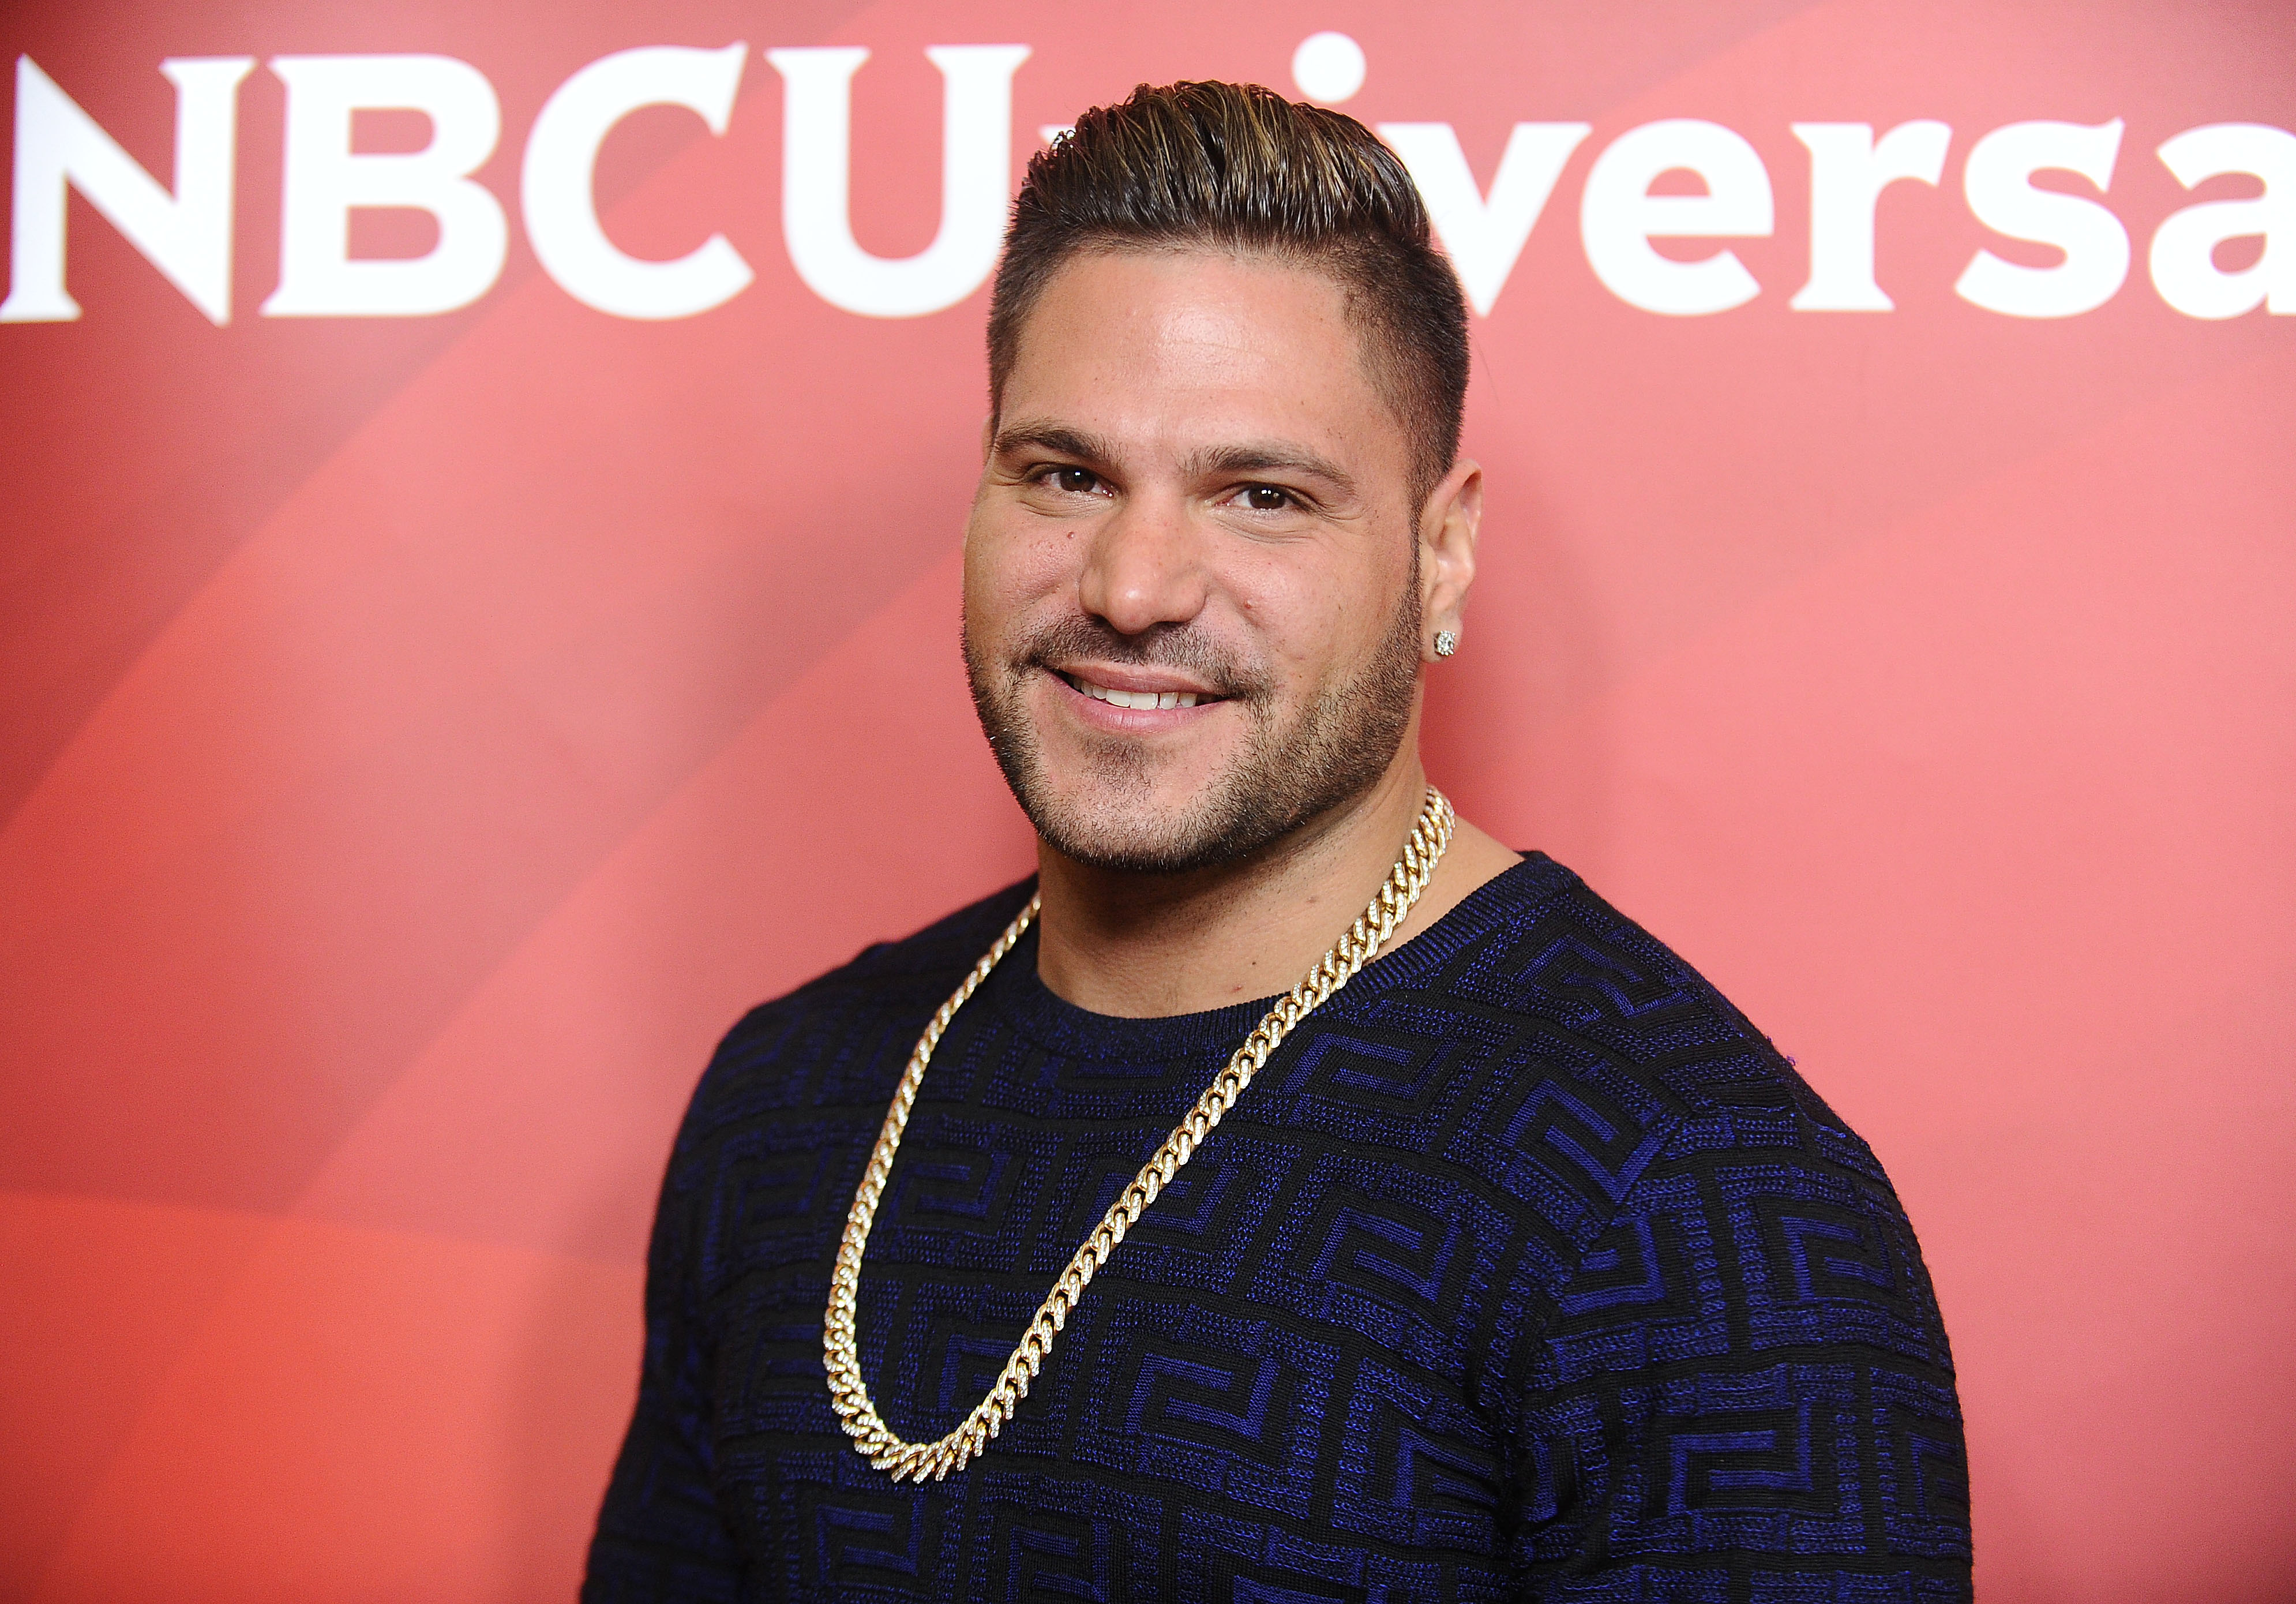 Ronnie Ortiz-Magro attends the 2017 NBCUniversal summer press day The Beverly Hilton Hotel on March 20, 2017